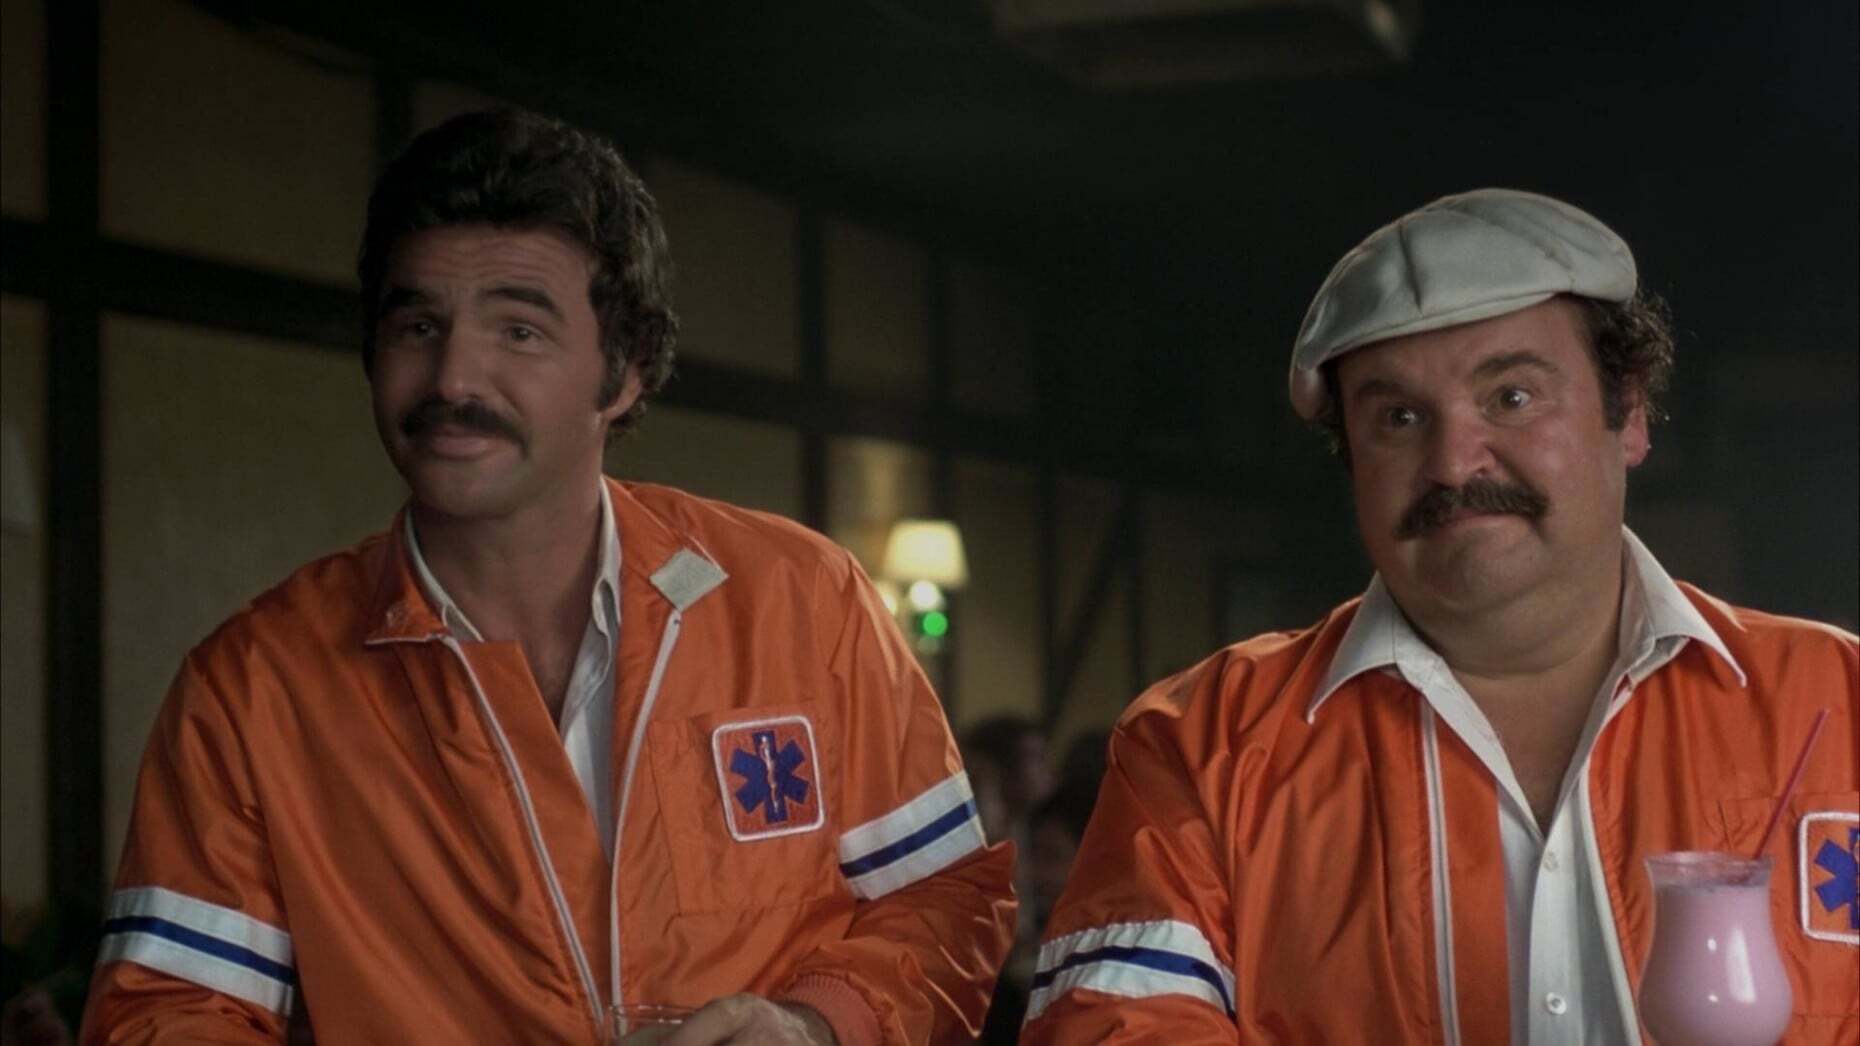 <p>What’s more exciting than a road trip from Connecticut to California? What about if that road trip was all part of an illegal race across the country? That’s exactly the plot of <a href="https://www.imdb.com/title/tt0082136/"><em>The Cannonball Run</em></a><em>,</em> in which an all-star cast that includes Burt Reynolds, Roger Moore, Dom DeLuise, Farrah Fawcett, Dean Martin, Sammy Davis Jr., and Jackie Chan all race from coast to coast. The Cannonball Run continues to live on in road trip lore with the <a href="https://www.dailymail.co.uk/news/article-8651929/New-Cannonball-Run-record-set-just-25-hours-39-minutes-thanks-coronavirus.html">record having been broken</a> countless times over the years.</p>